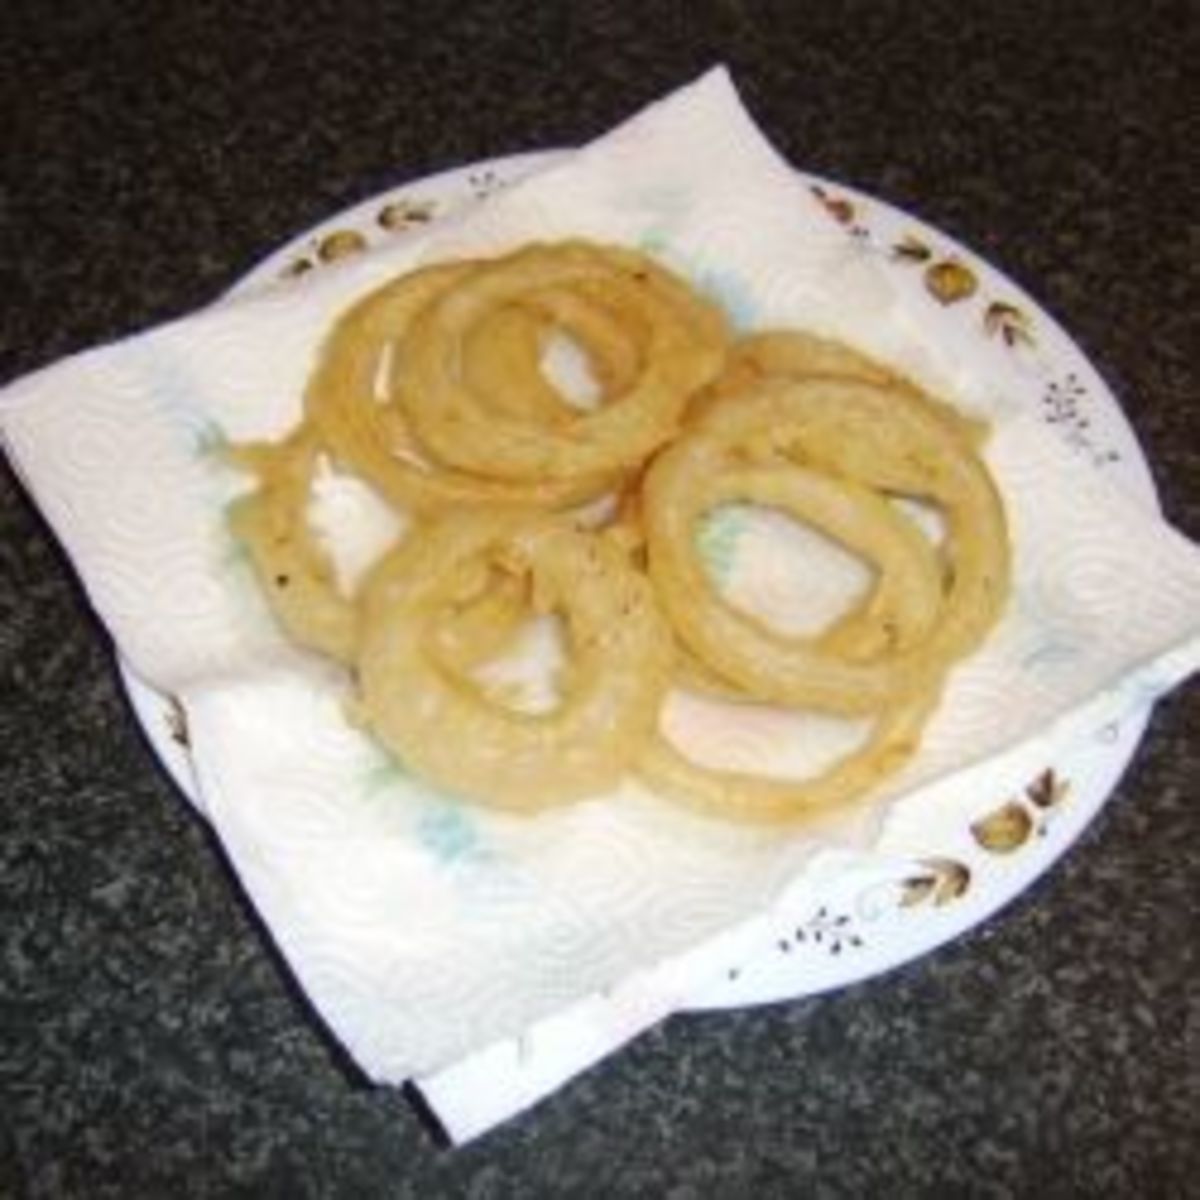 Why pay for high-priced restaurant onion rings when you can make better ones at home? Check out the recipes below! 